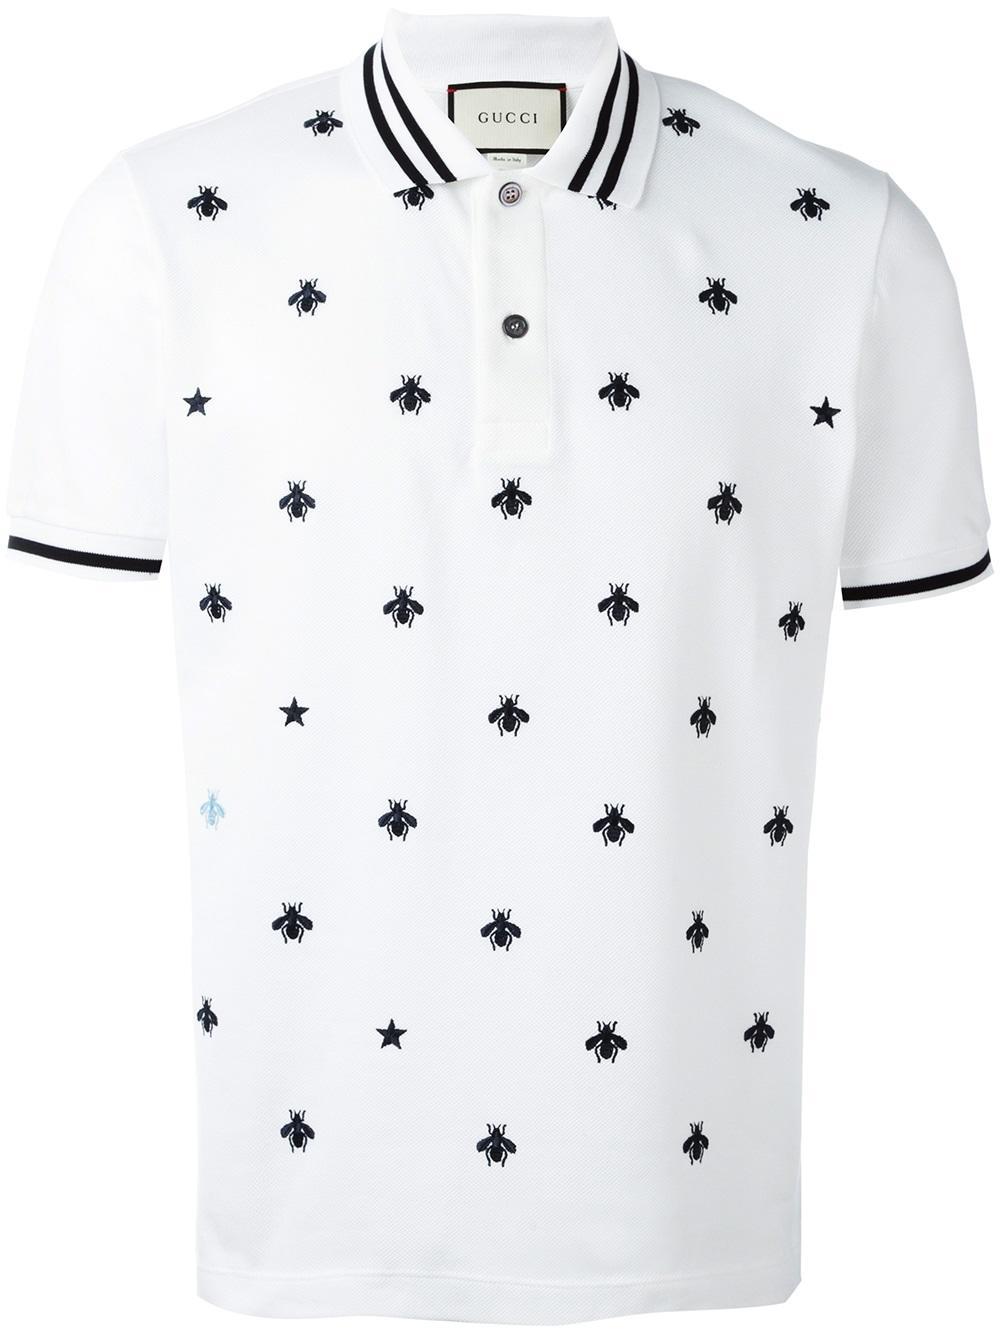 Gucci Bee And Star Polo Shirt in White for Men - Lyst